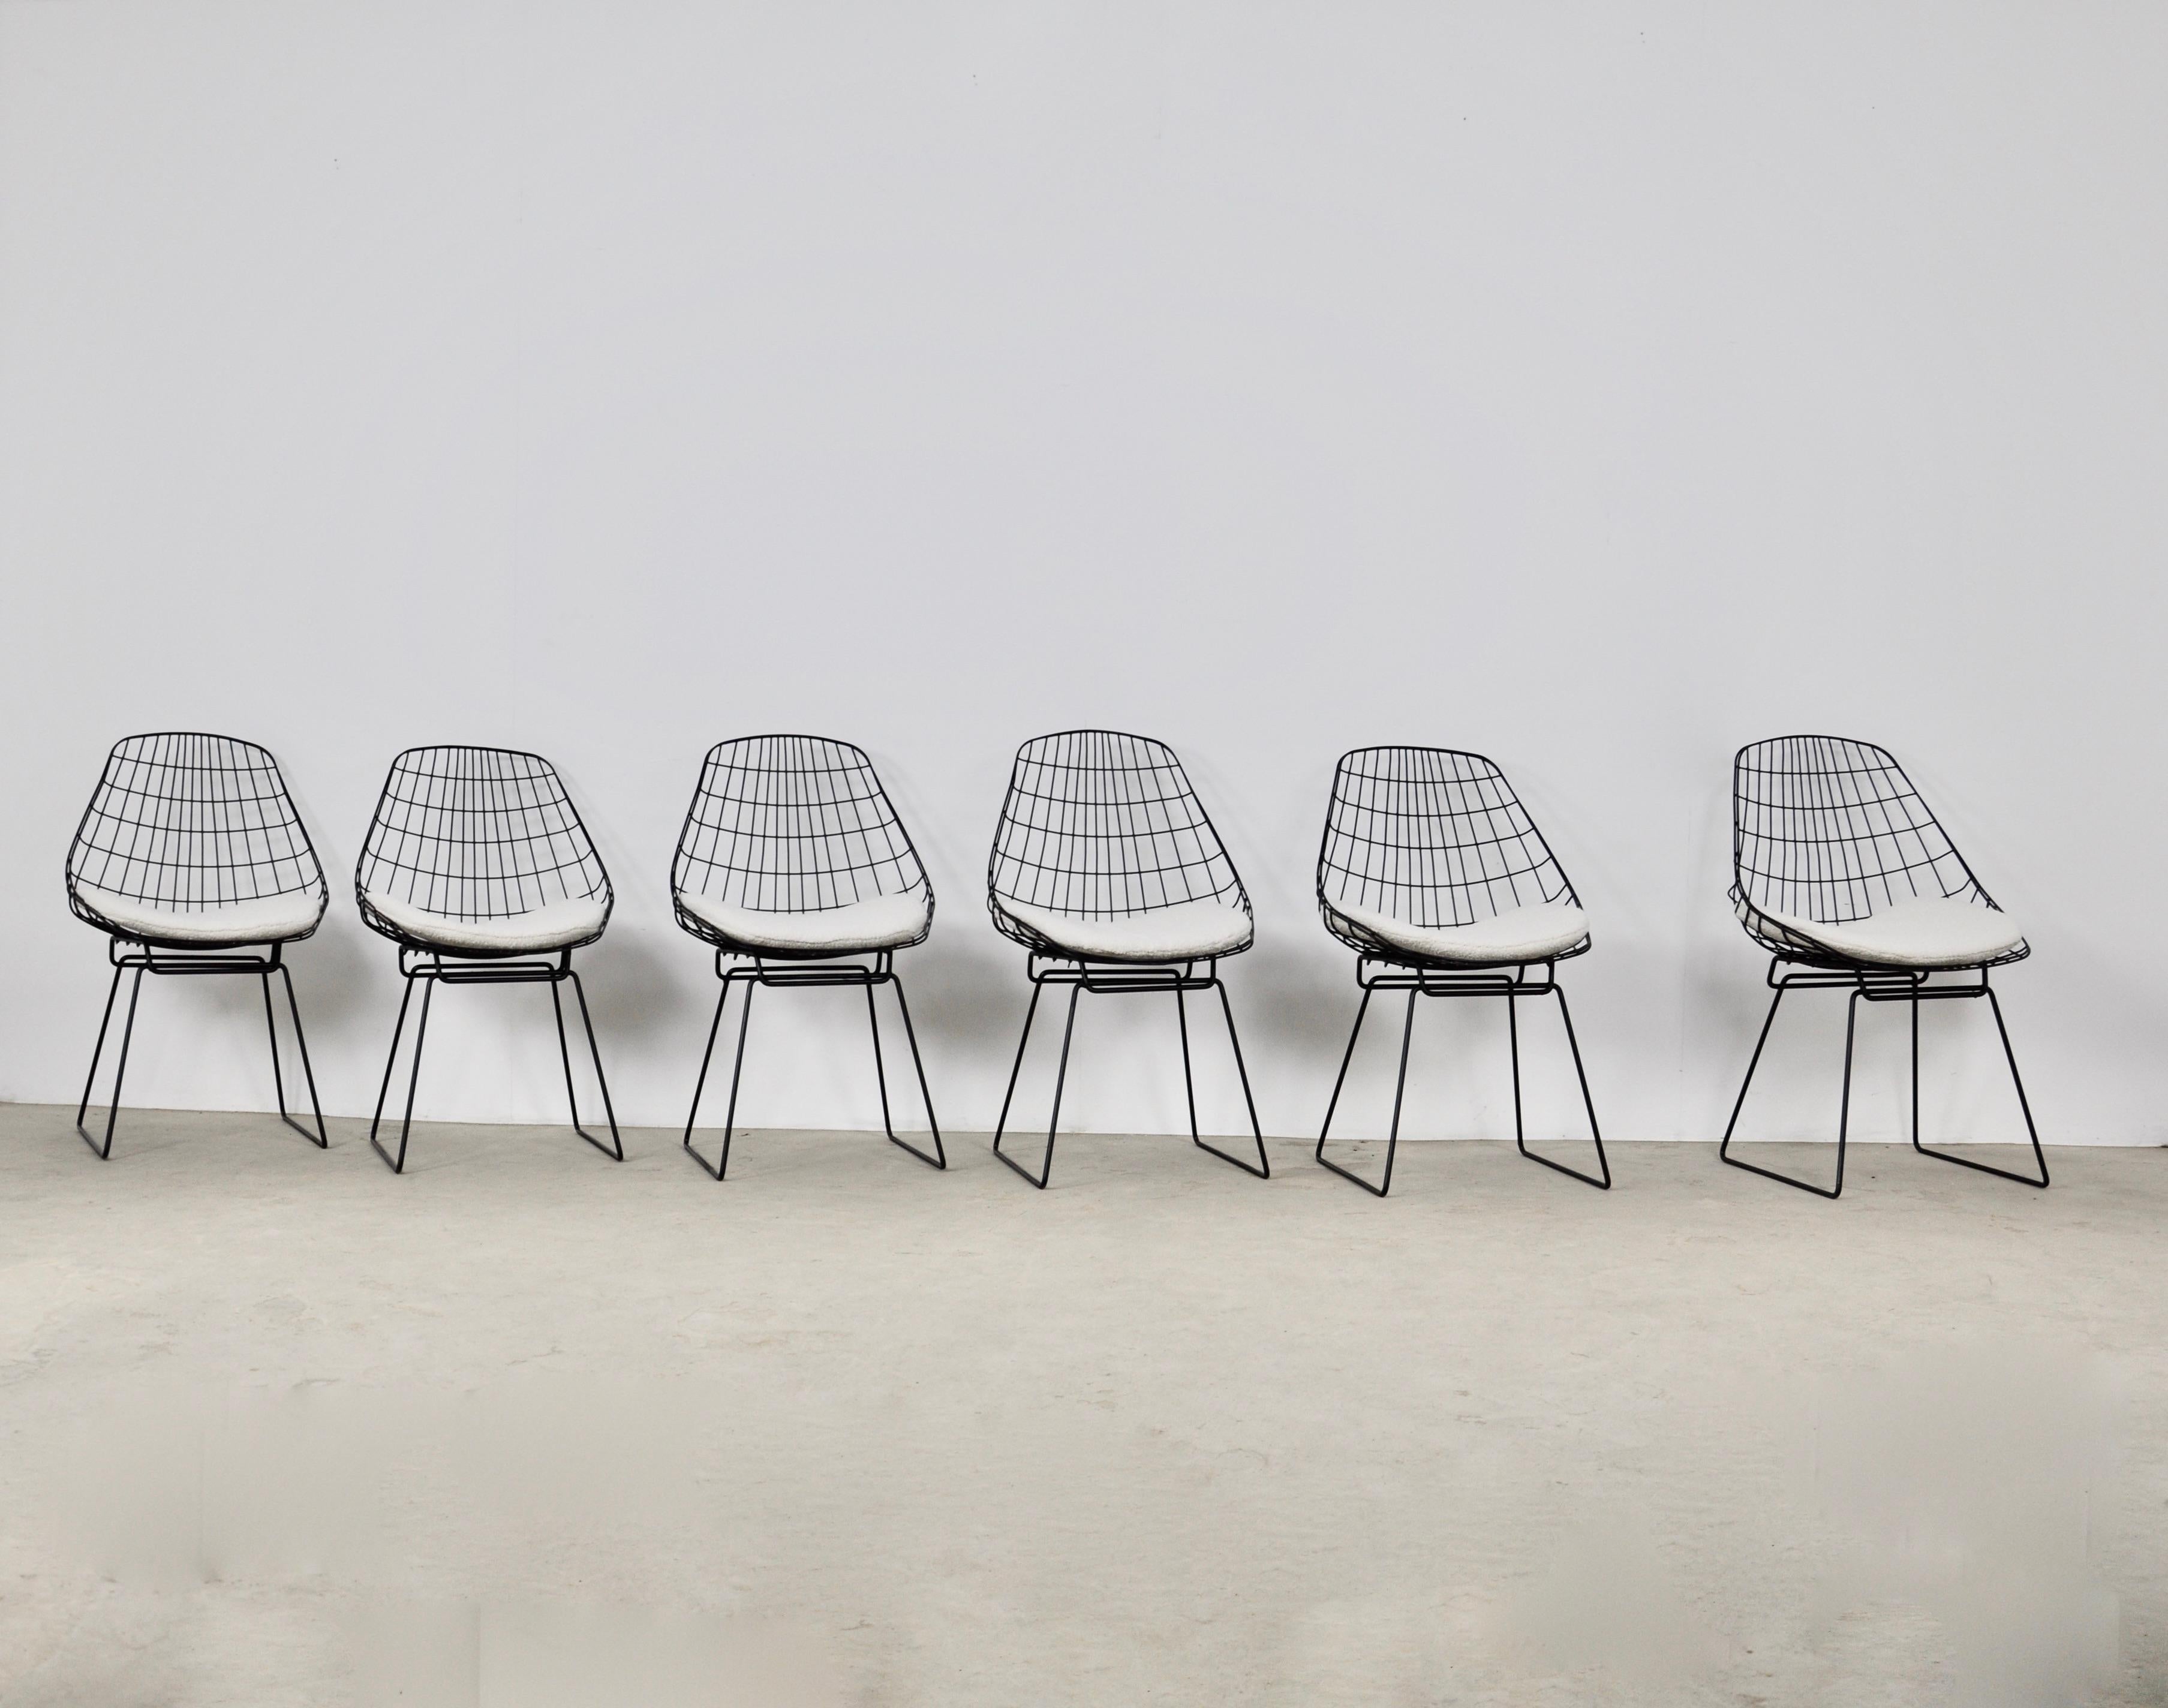 Set of 6 chairs in black metal and white fabric seat. Wear due to time and age of the chairs. Measure: Seat height: 42cm.